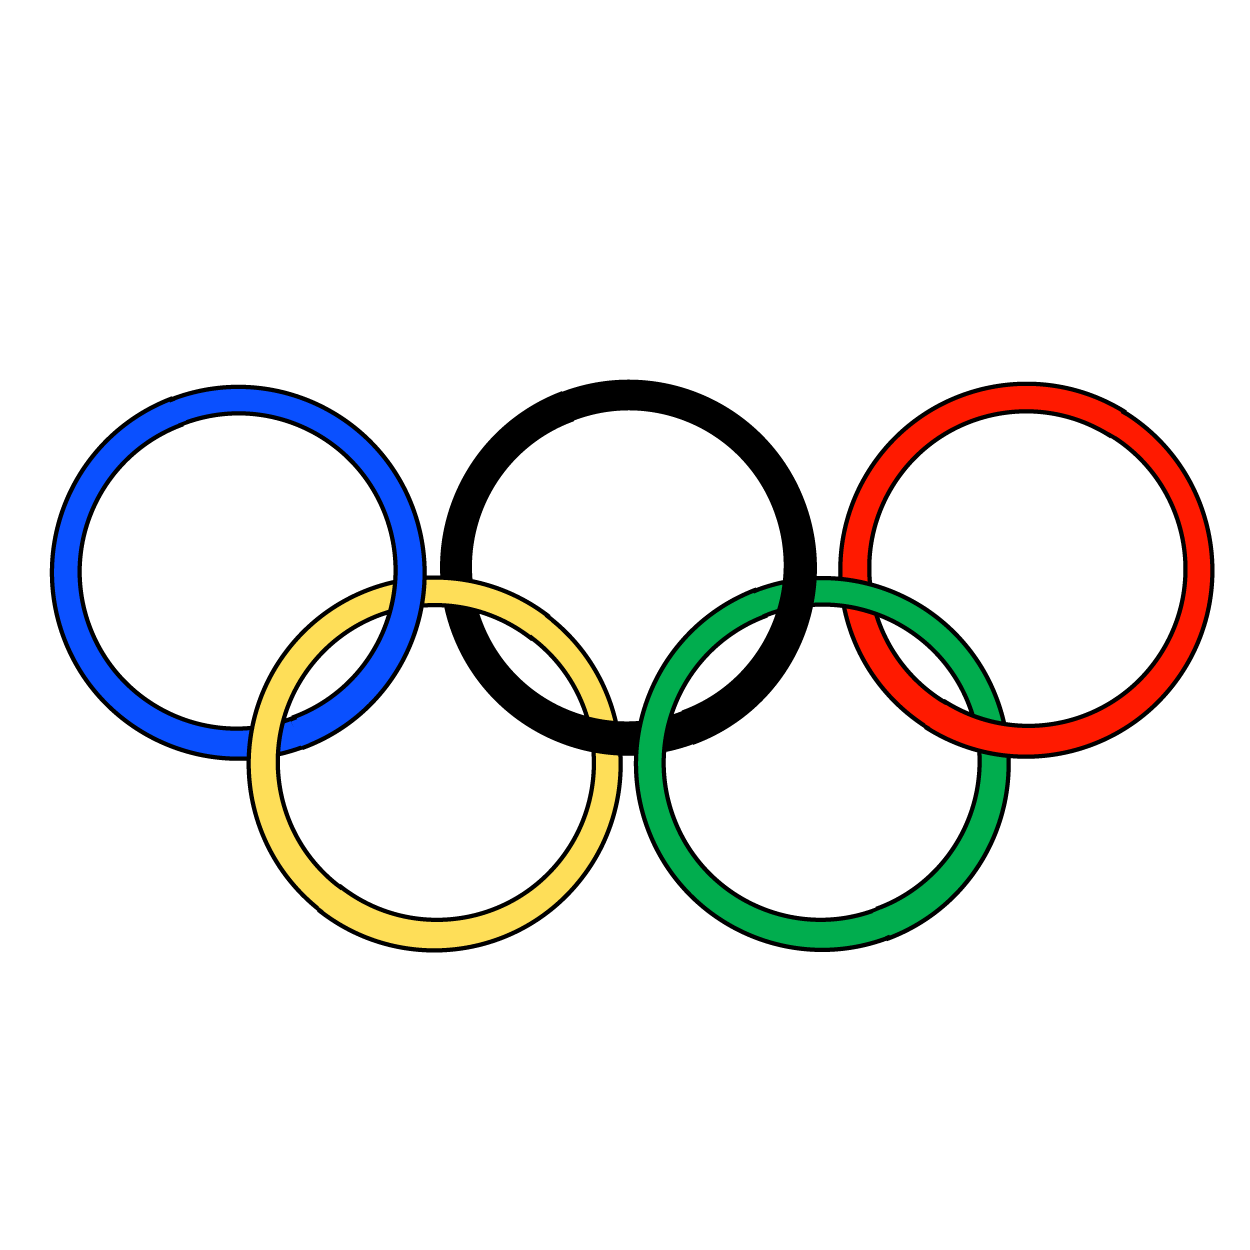 medal clipart olympic